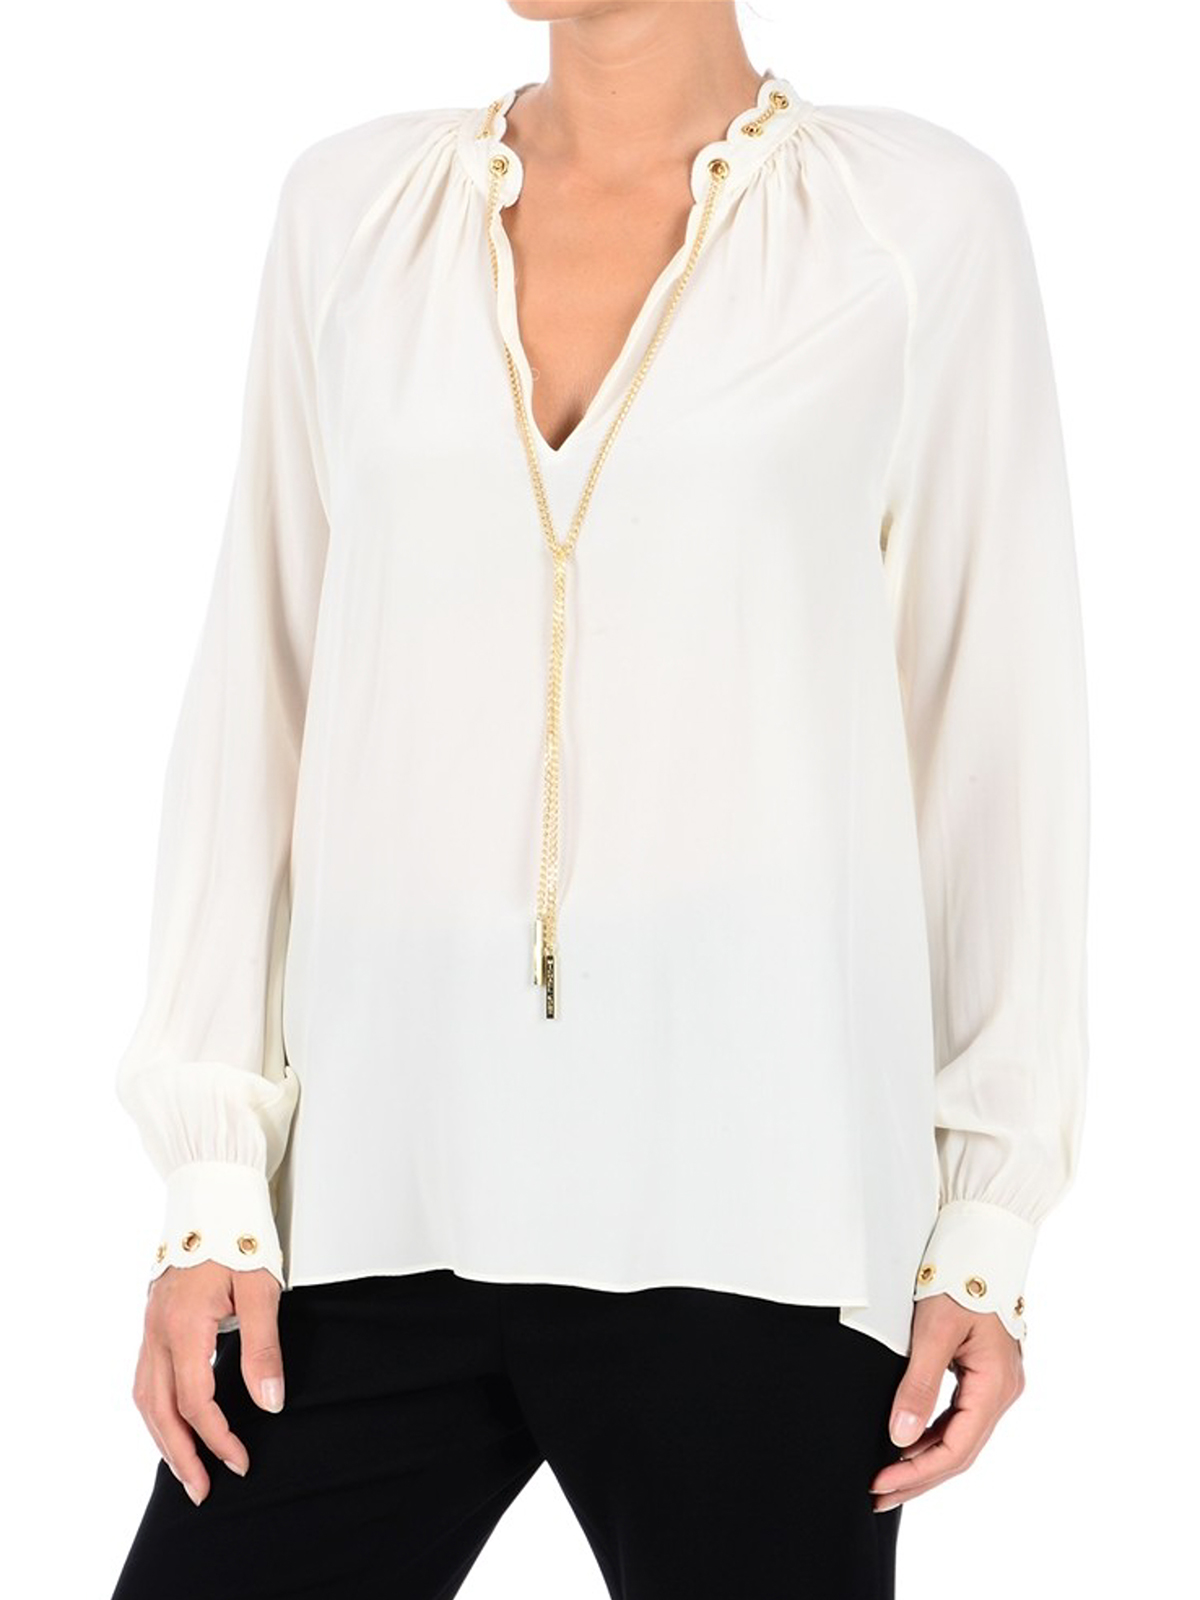 michael kors white blouse with gold chain